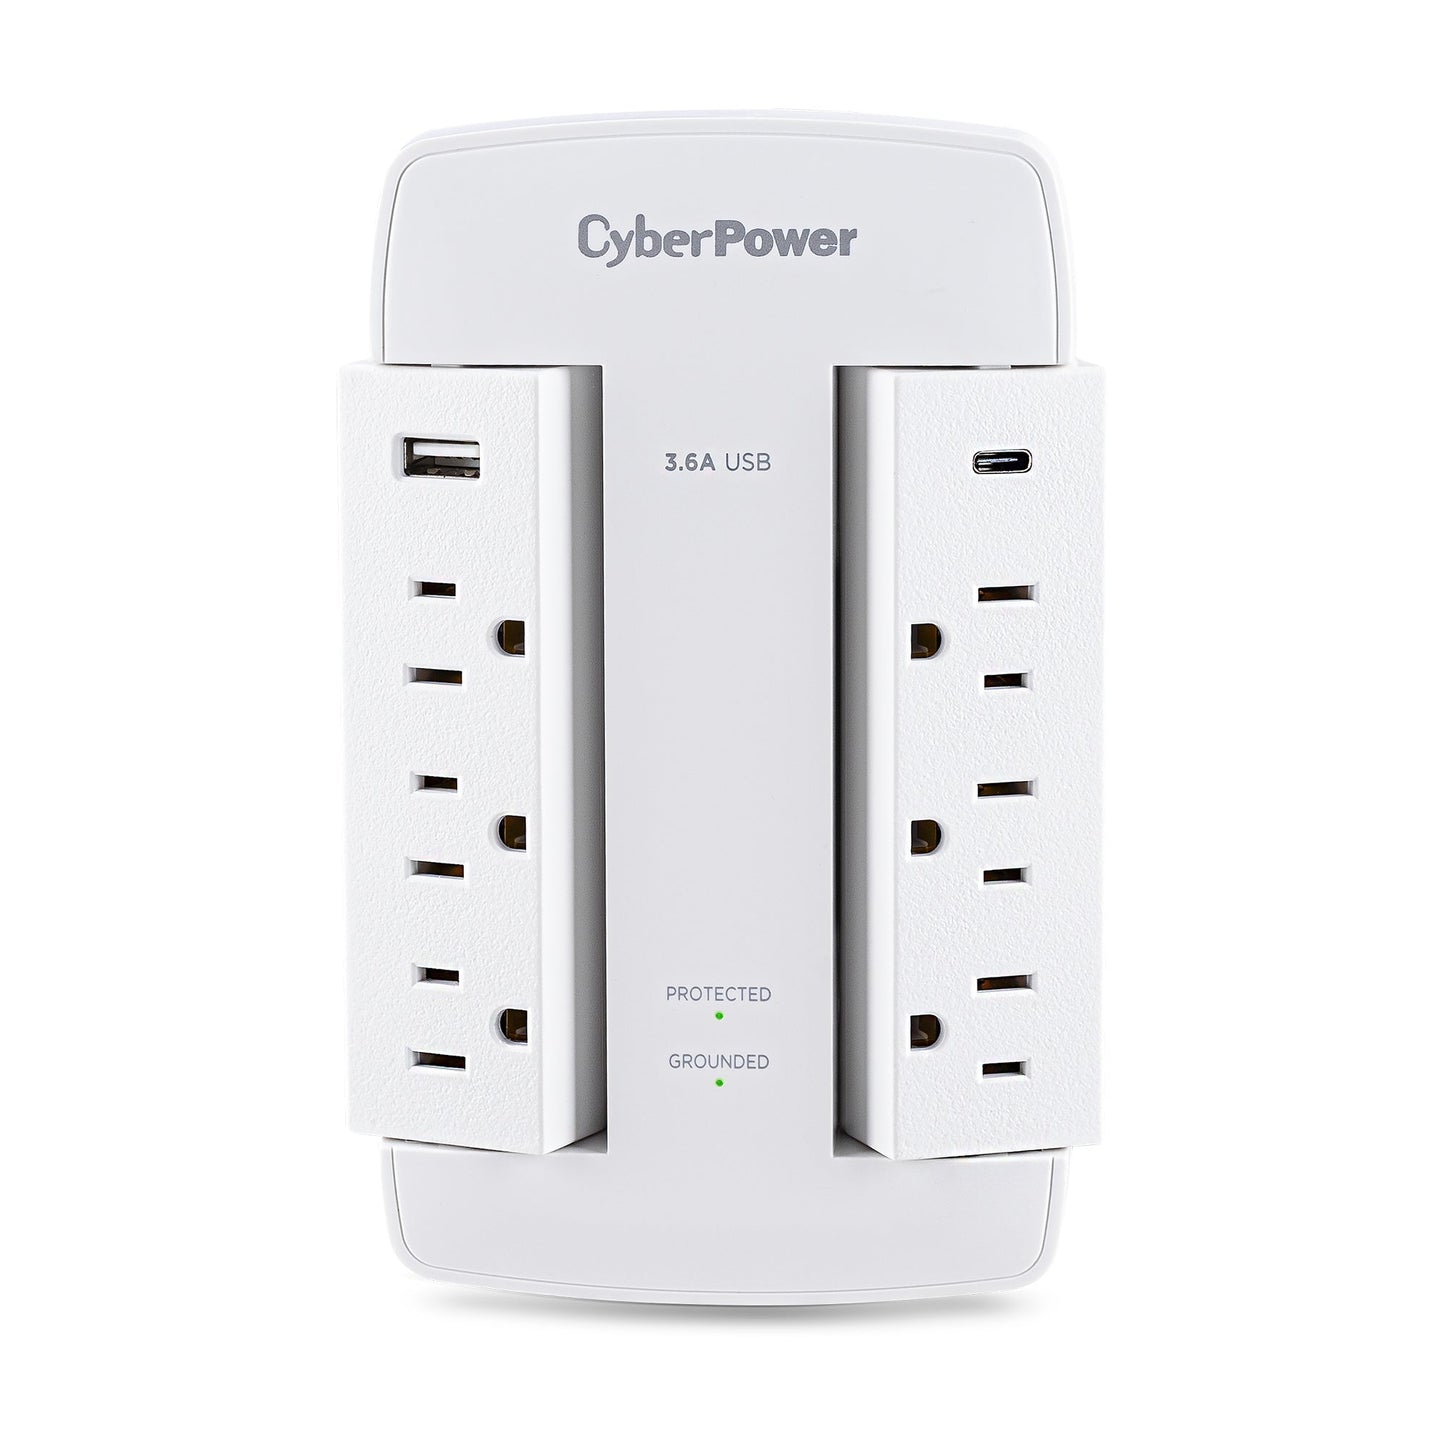 Cyberpower Csp600Wsurc5 Surge Protector White 6 Ac Outlet(S) 125 V